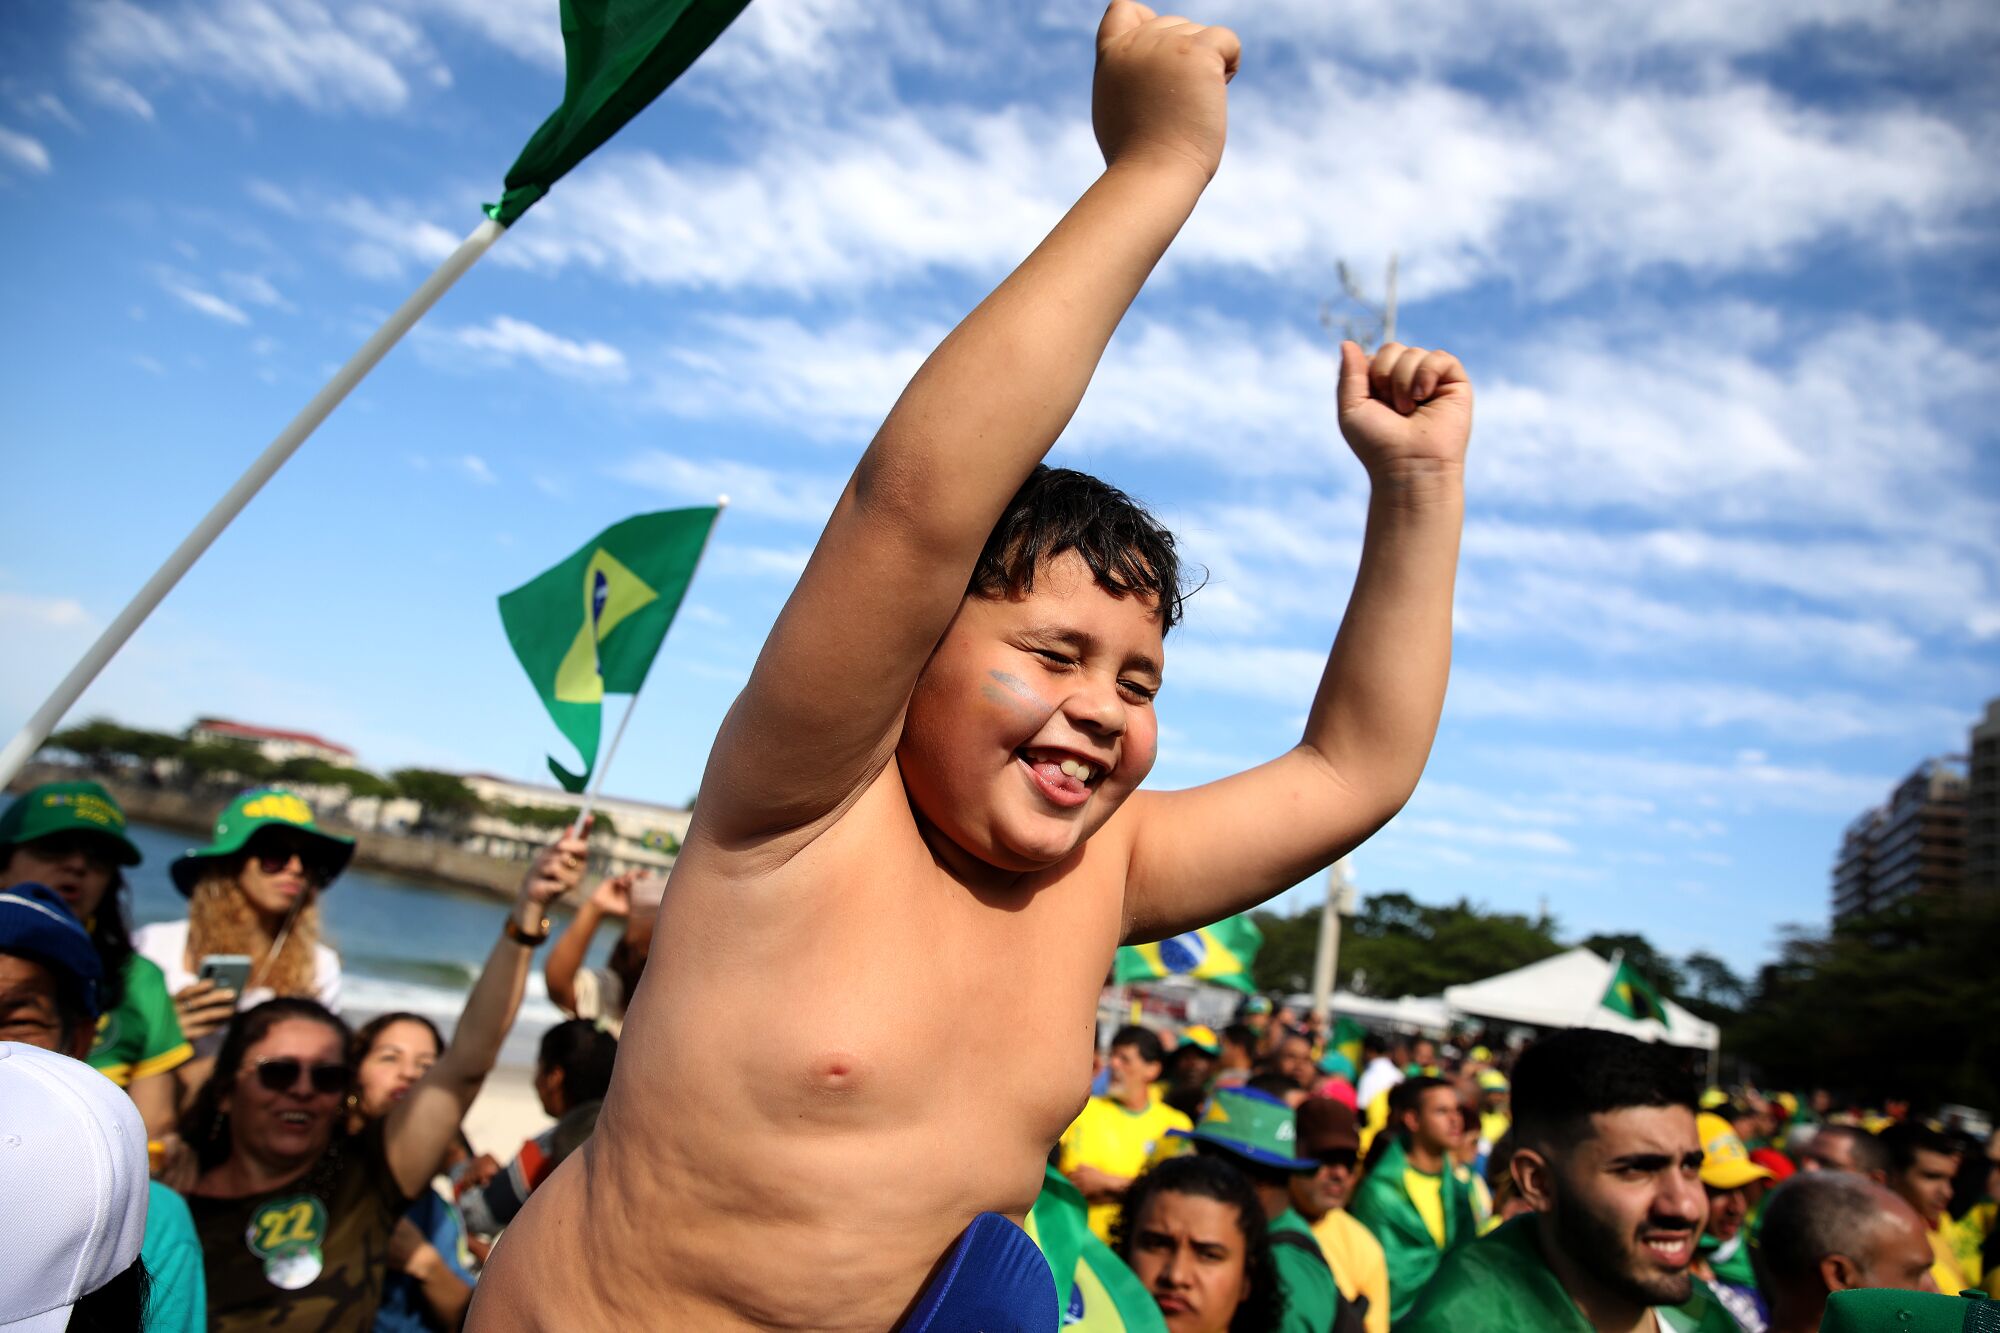 A boy cheers during a rally.